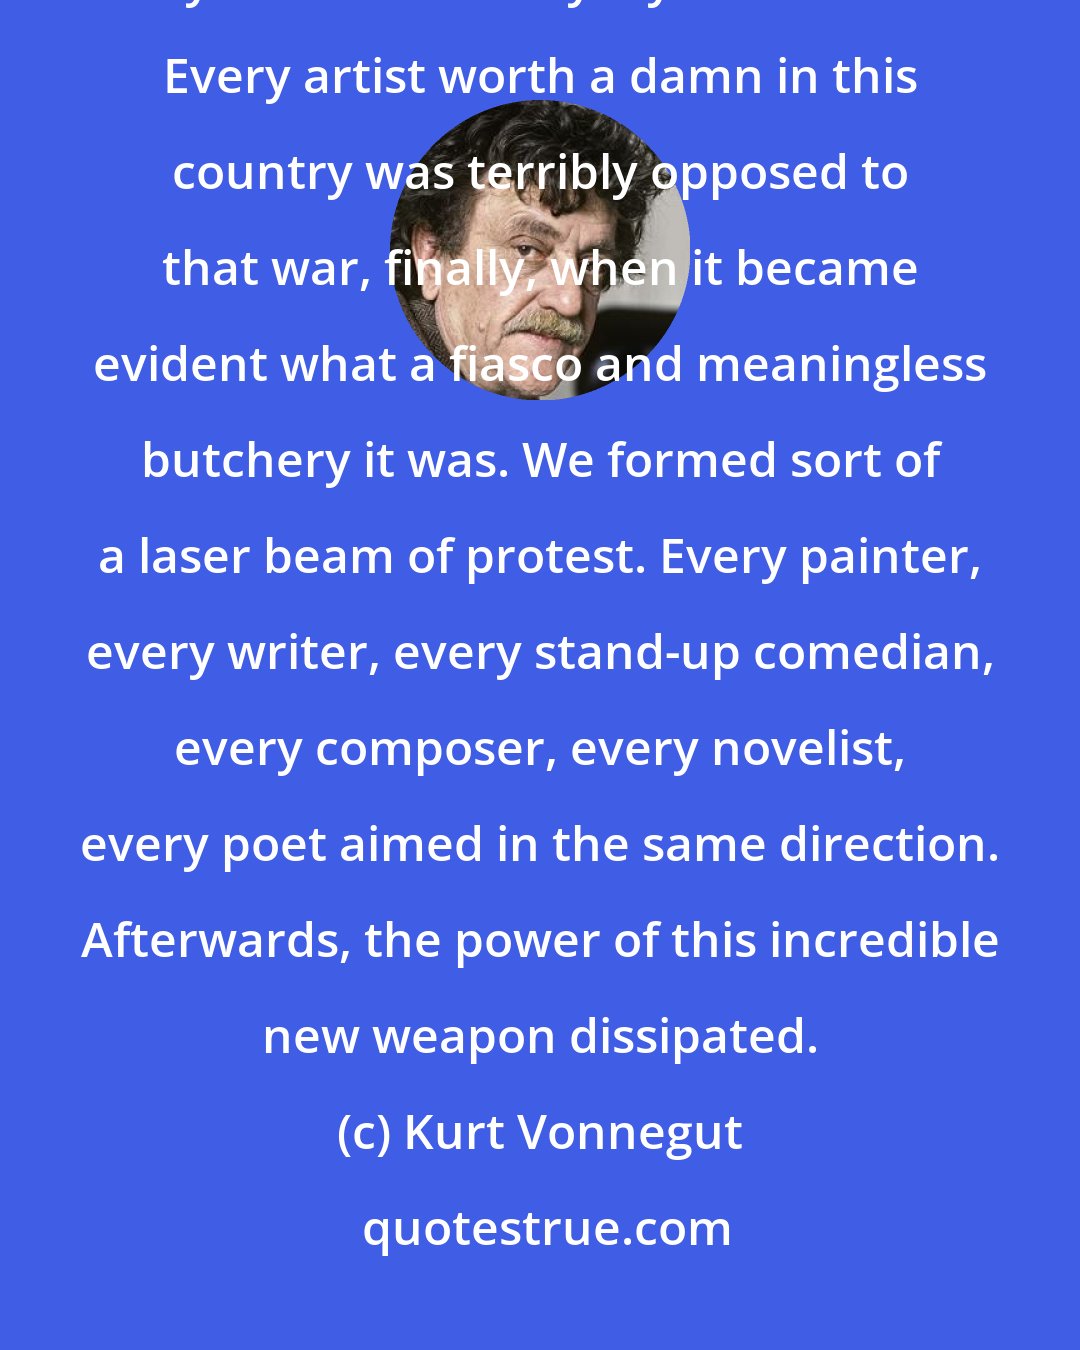 Kurt Vonnegut: I'm an old guy, and I was protesting during the Vietnam War. We killed fifty Asians for every loyal American. Every artist worth a damn in this country was terribly opposed to that war, finally, when it became evident what a fiasco and meaningless butchery it was. We formed sort of a laser beam of protest. Every painter, every writer, every stand-up comedian, every composer, every novelist, every poet aimed in the same direction. Afterwards, the power of this incredible new weapon dissipated.